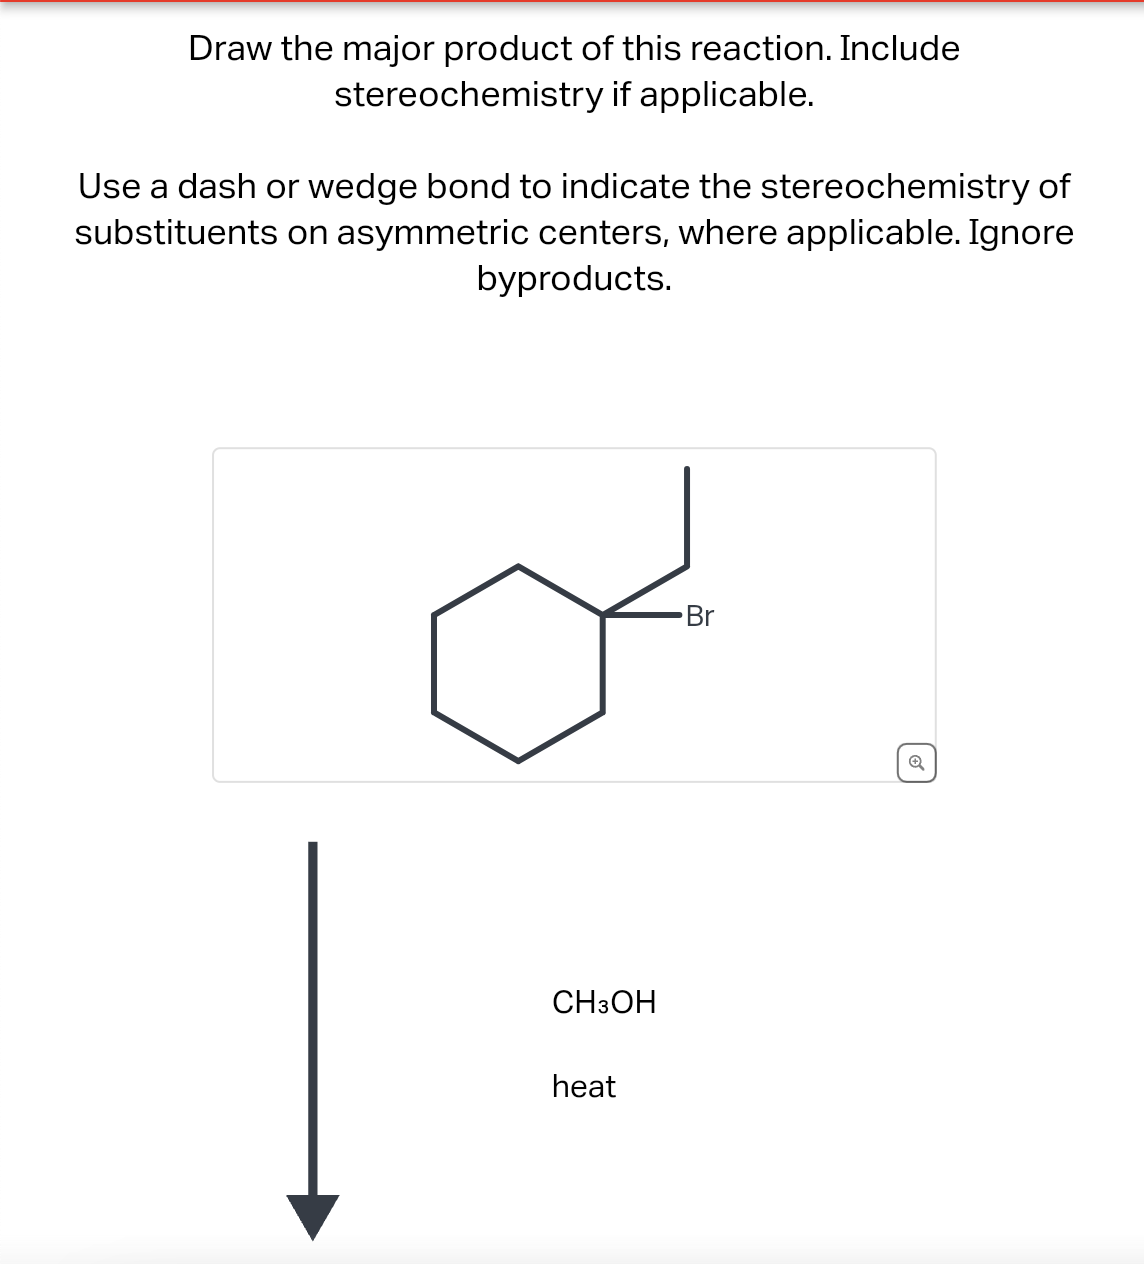 Draw the major product of this reaction. Include
stereochemistry if applicable.
Use a dash or wedge bond to indicate the stereochemistry of
substituents on asymmetric centers, where applicable. Ignore
byproducts.
CH3OH
heat
-Br
Q